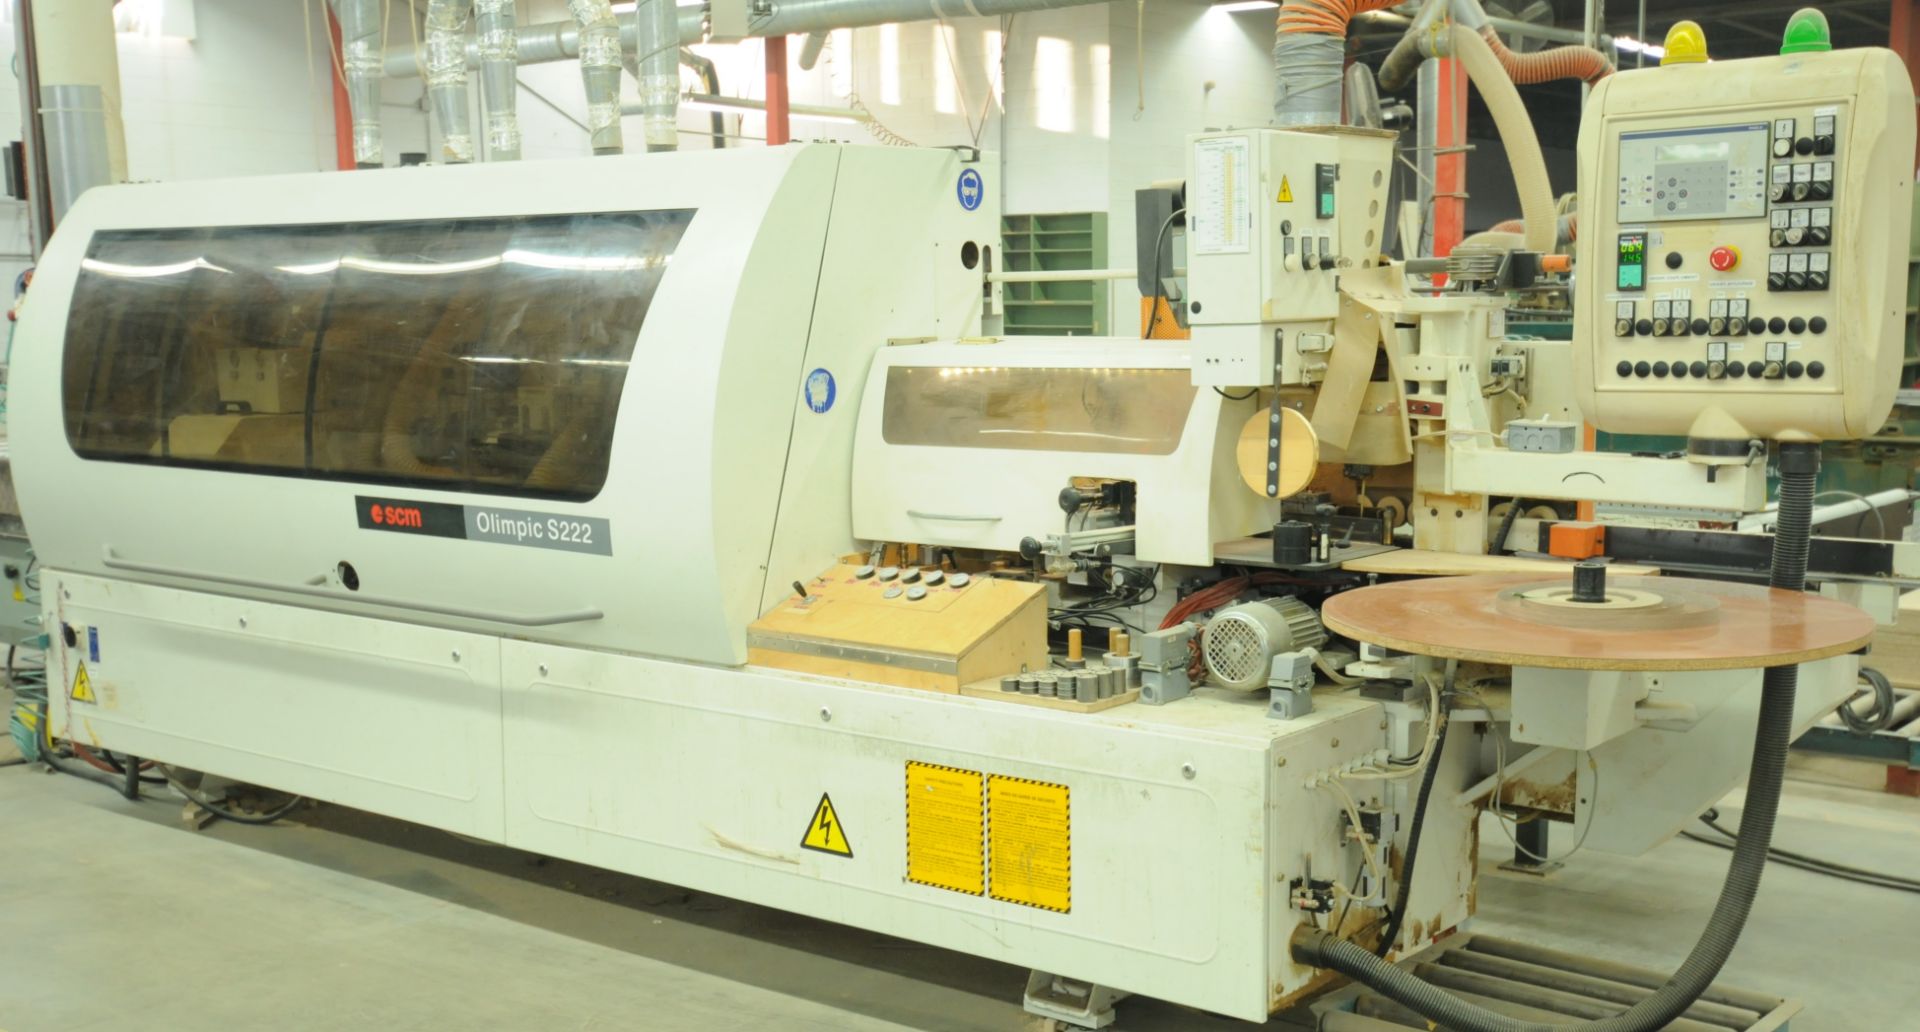 SCM (2003) OLYMPIC S222 CNC AUTOMATIC EDGE BANDING MACHINE WITH MAGELIS CNC CONTROL, 0.86" MAX. EDGE